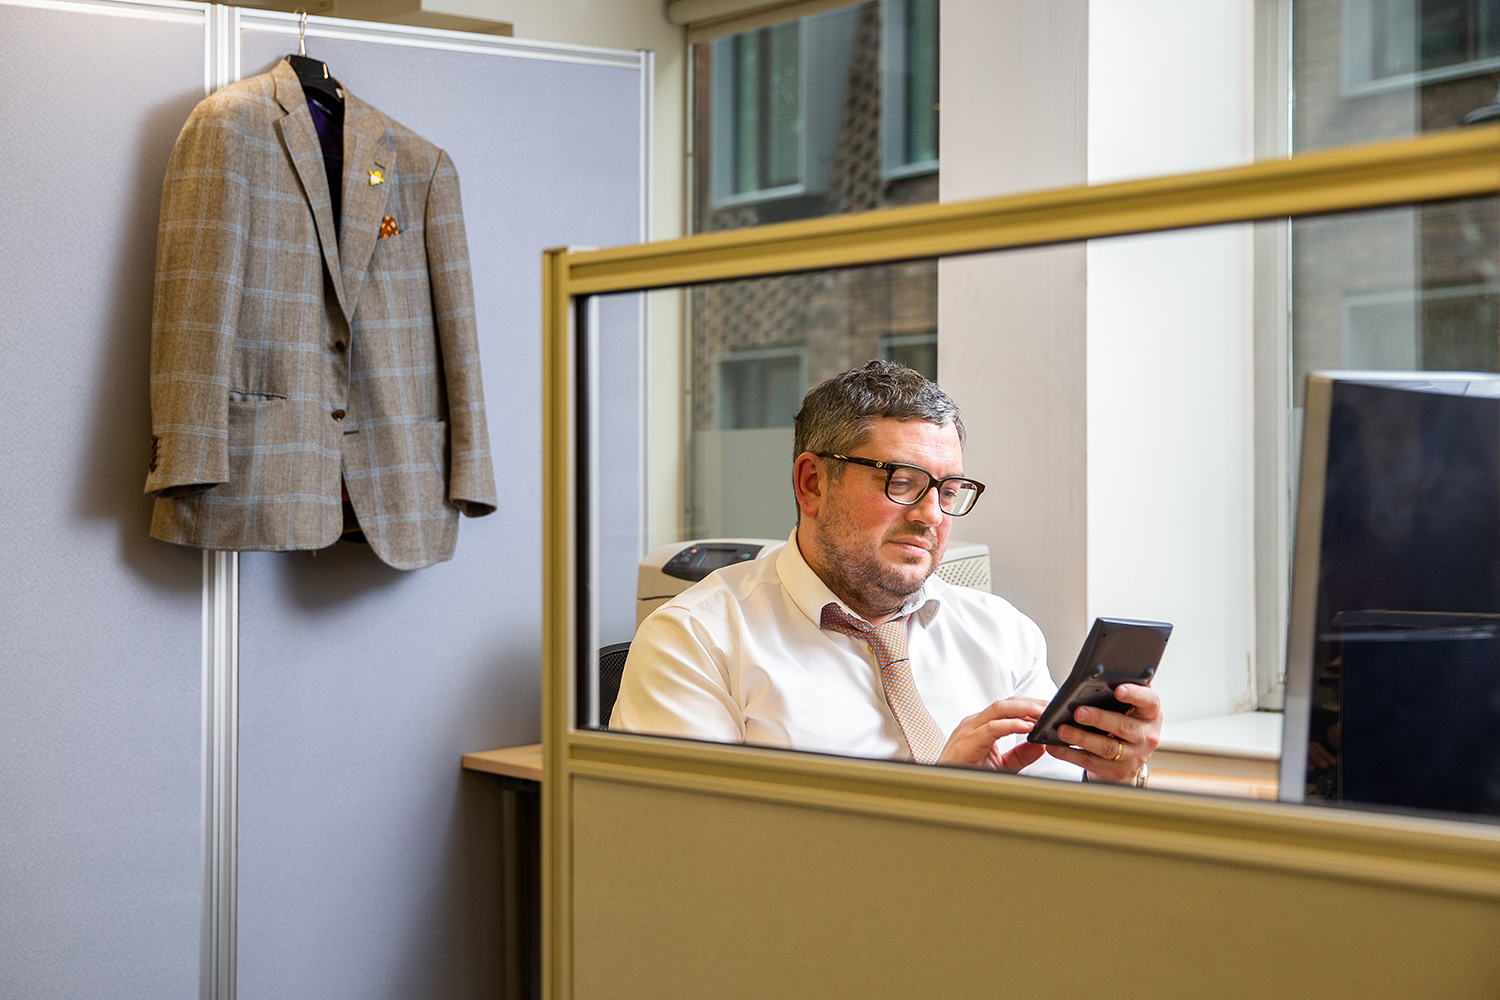 accountant sitting in cubicle